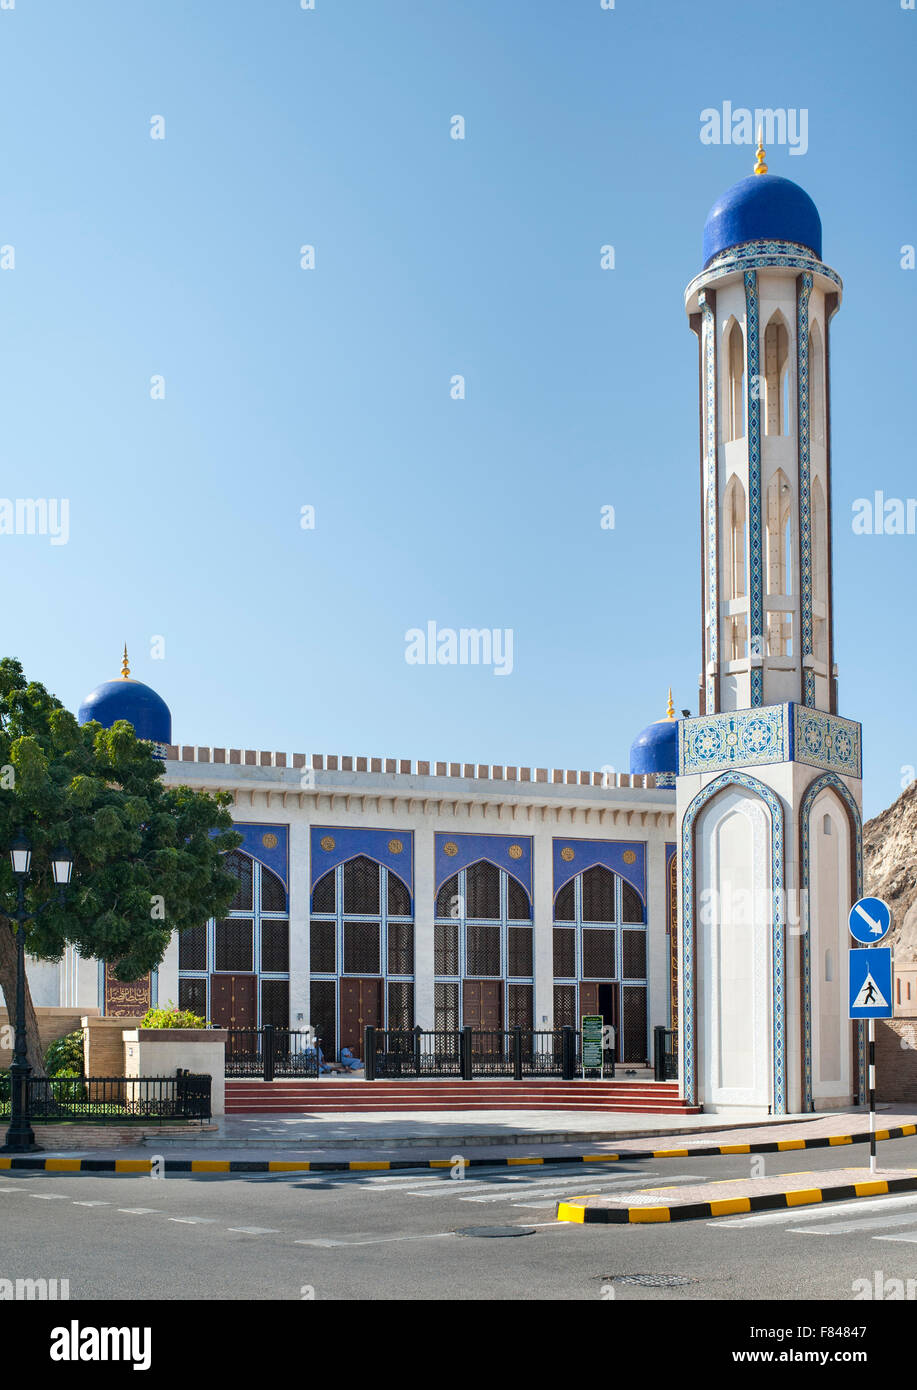 Al Khor Mosque in Old Muscat, part of the capital of the Sultanate of Oman. Stock Photo